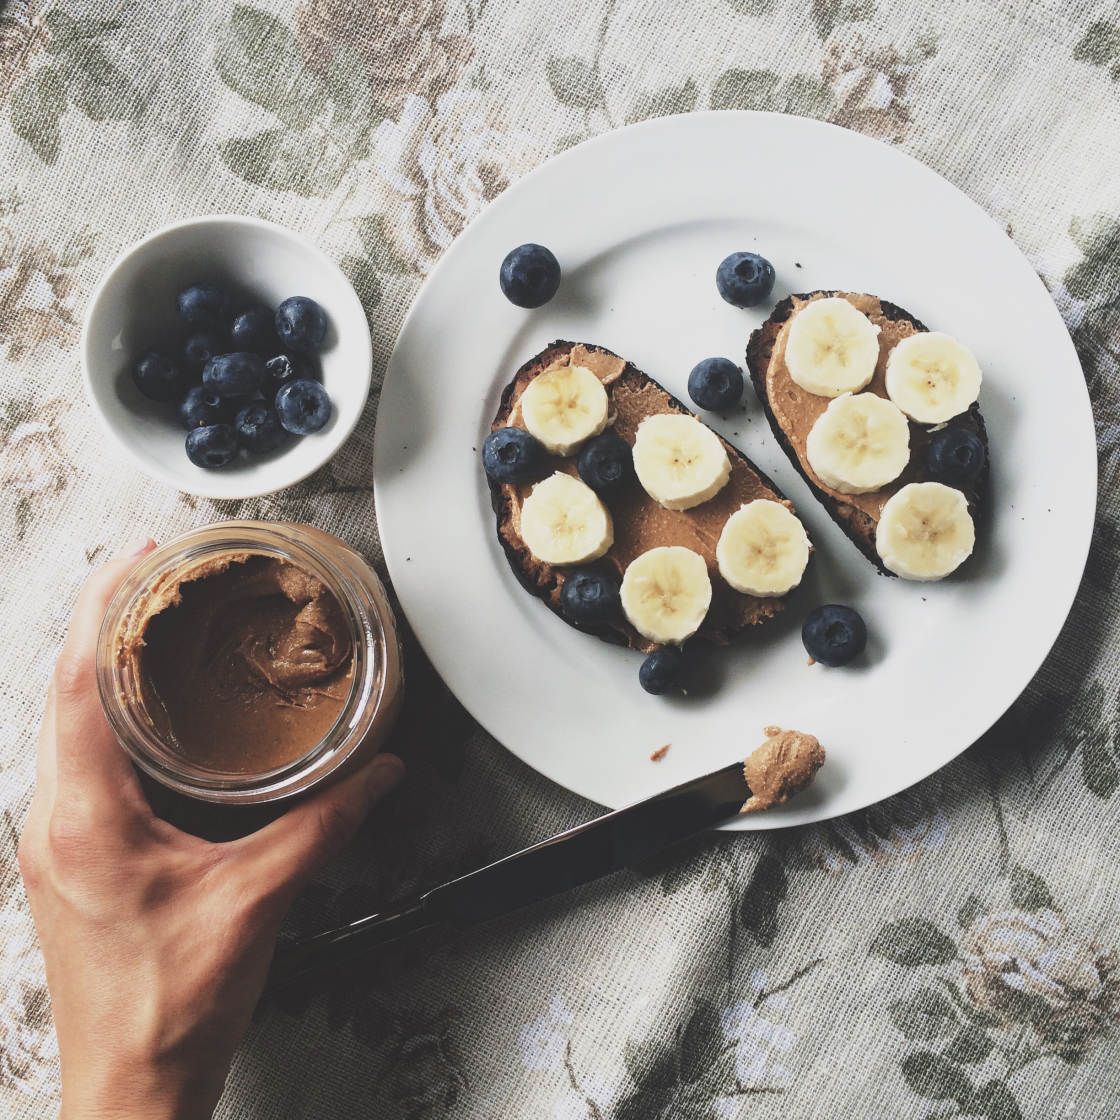 A person holding a jar of peanut butter next to a plate with toast and fruit. - Foodie